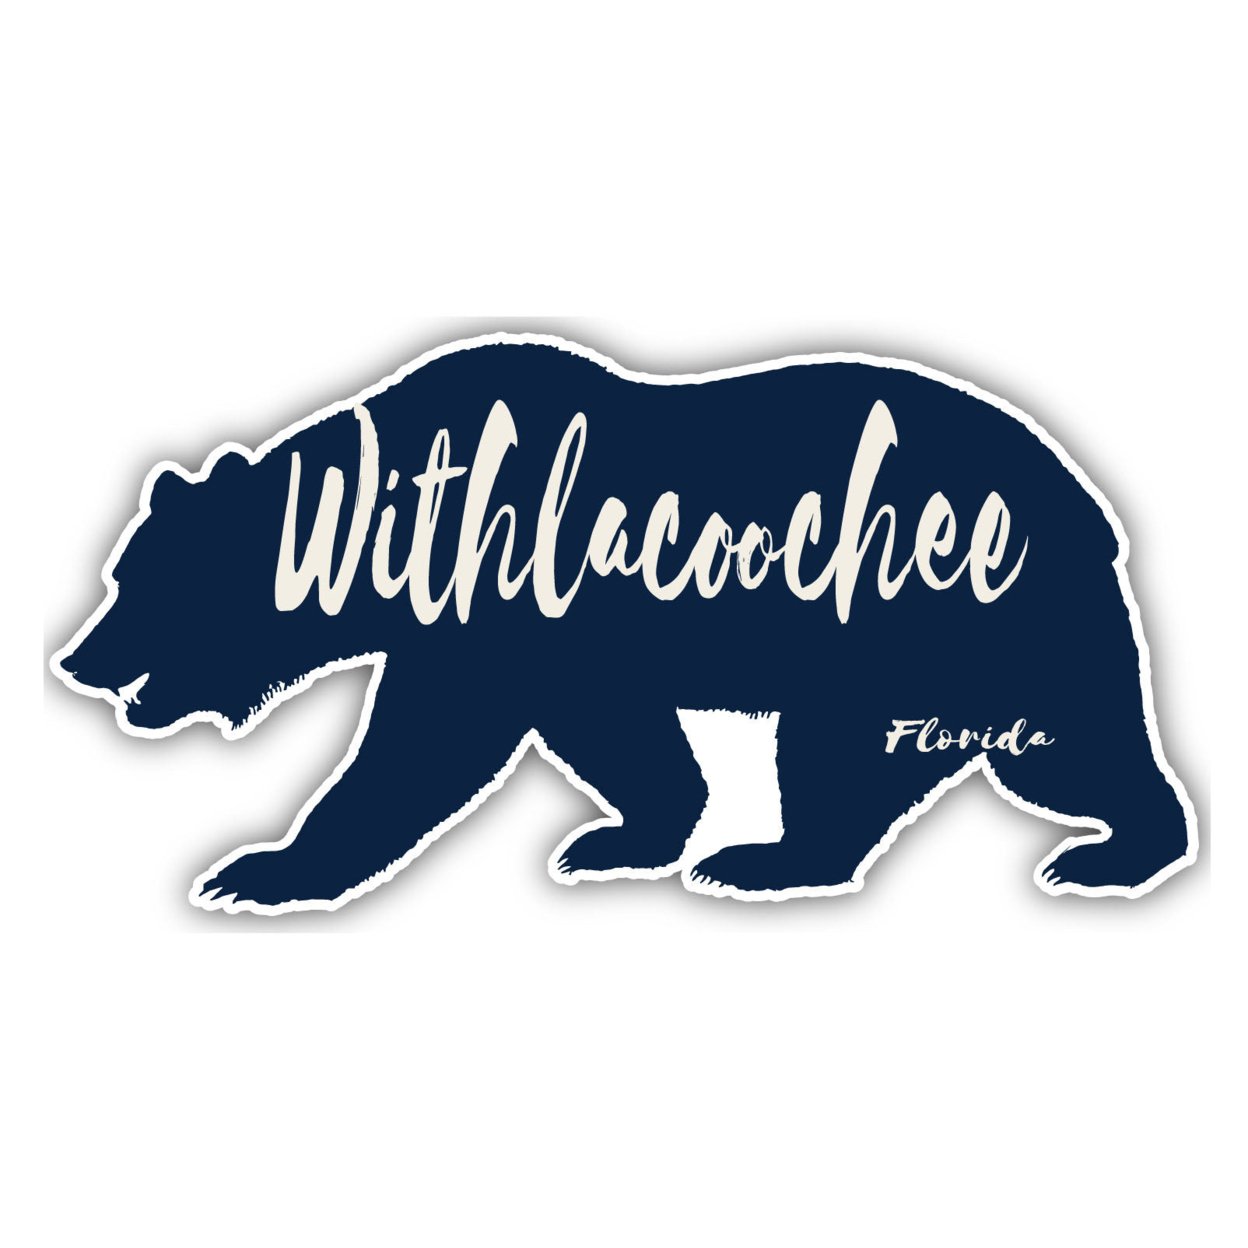 Withlacoochee Florida Souvenir Decorative Stickers (Choose Theme And Size) - Single Unit, 4-Inch, Great Outdoors